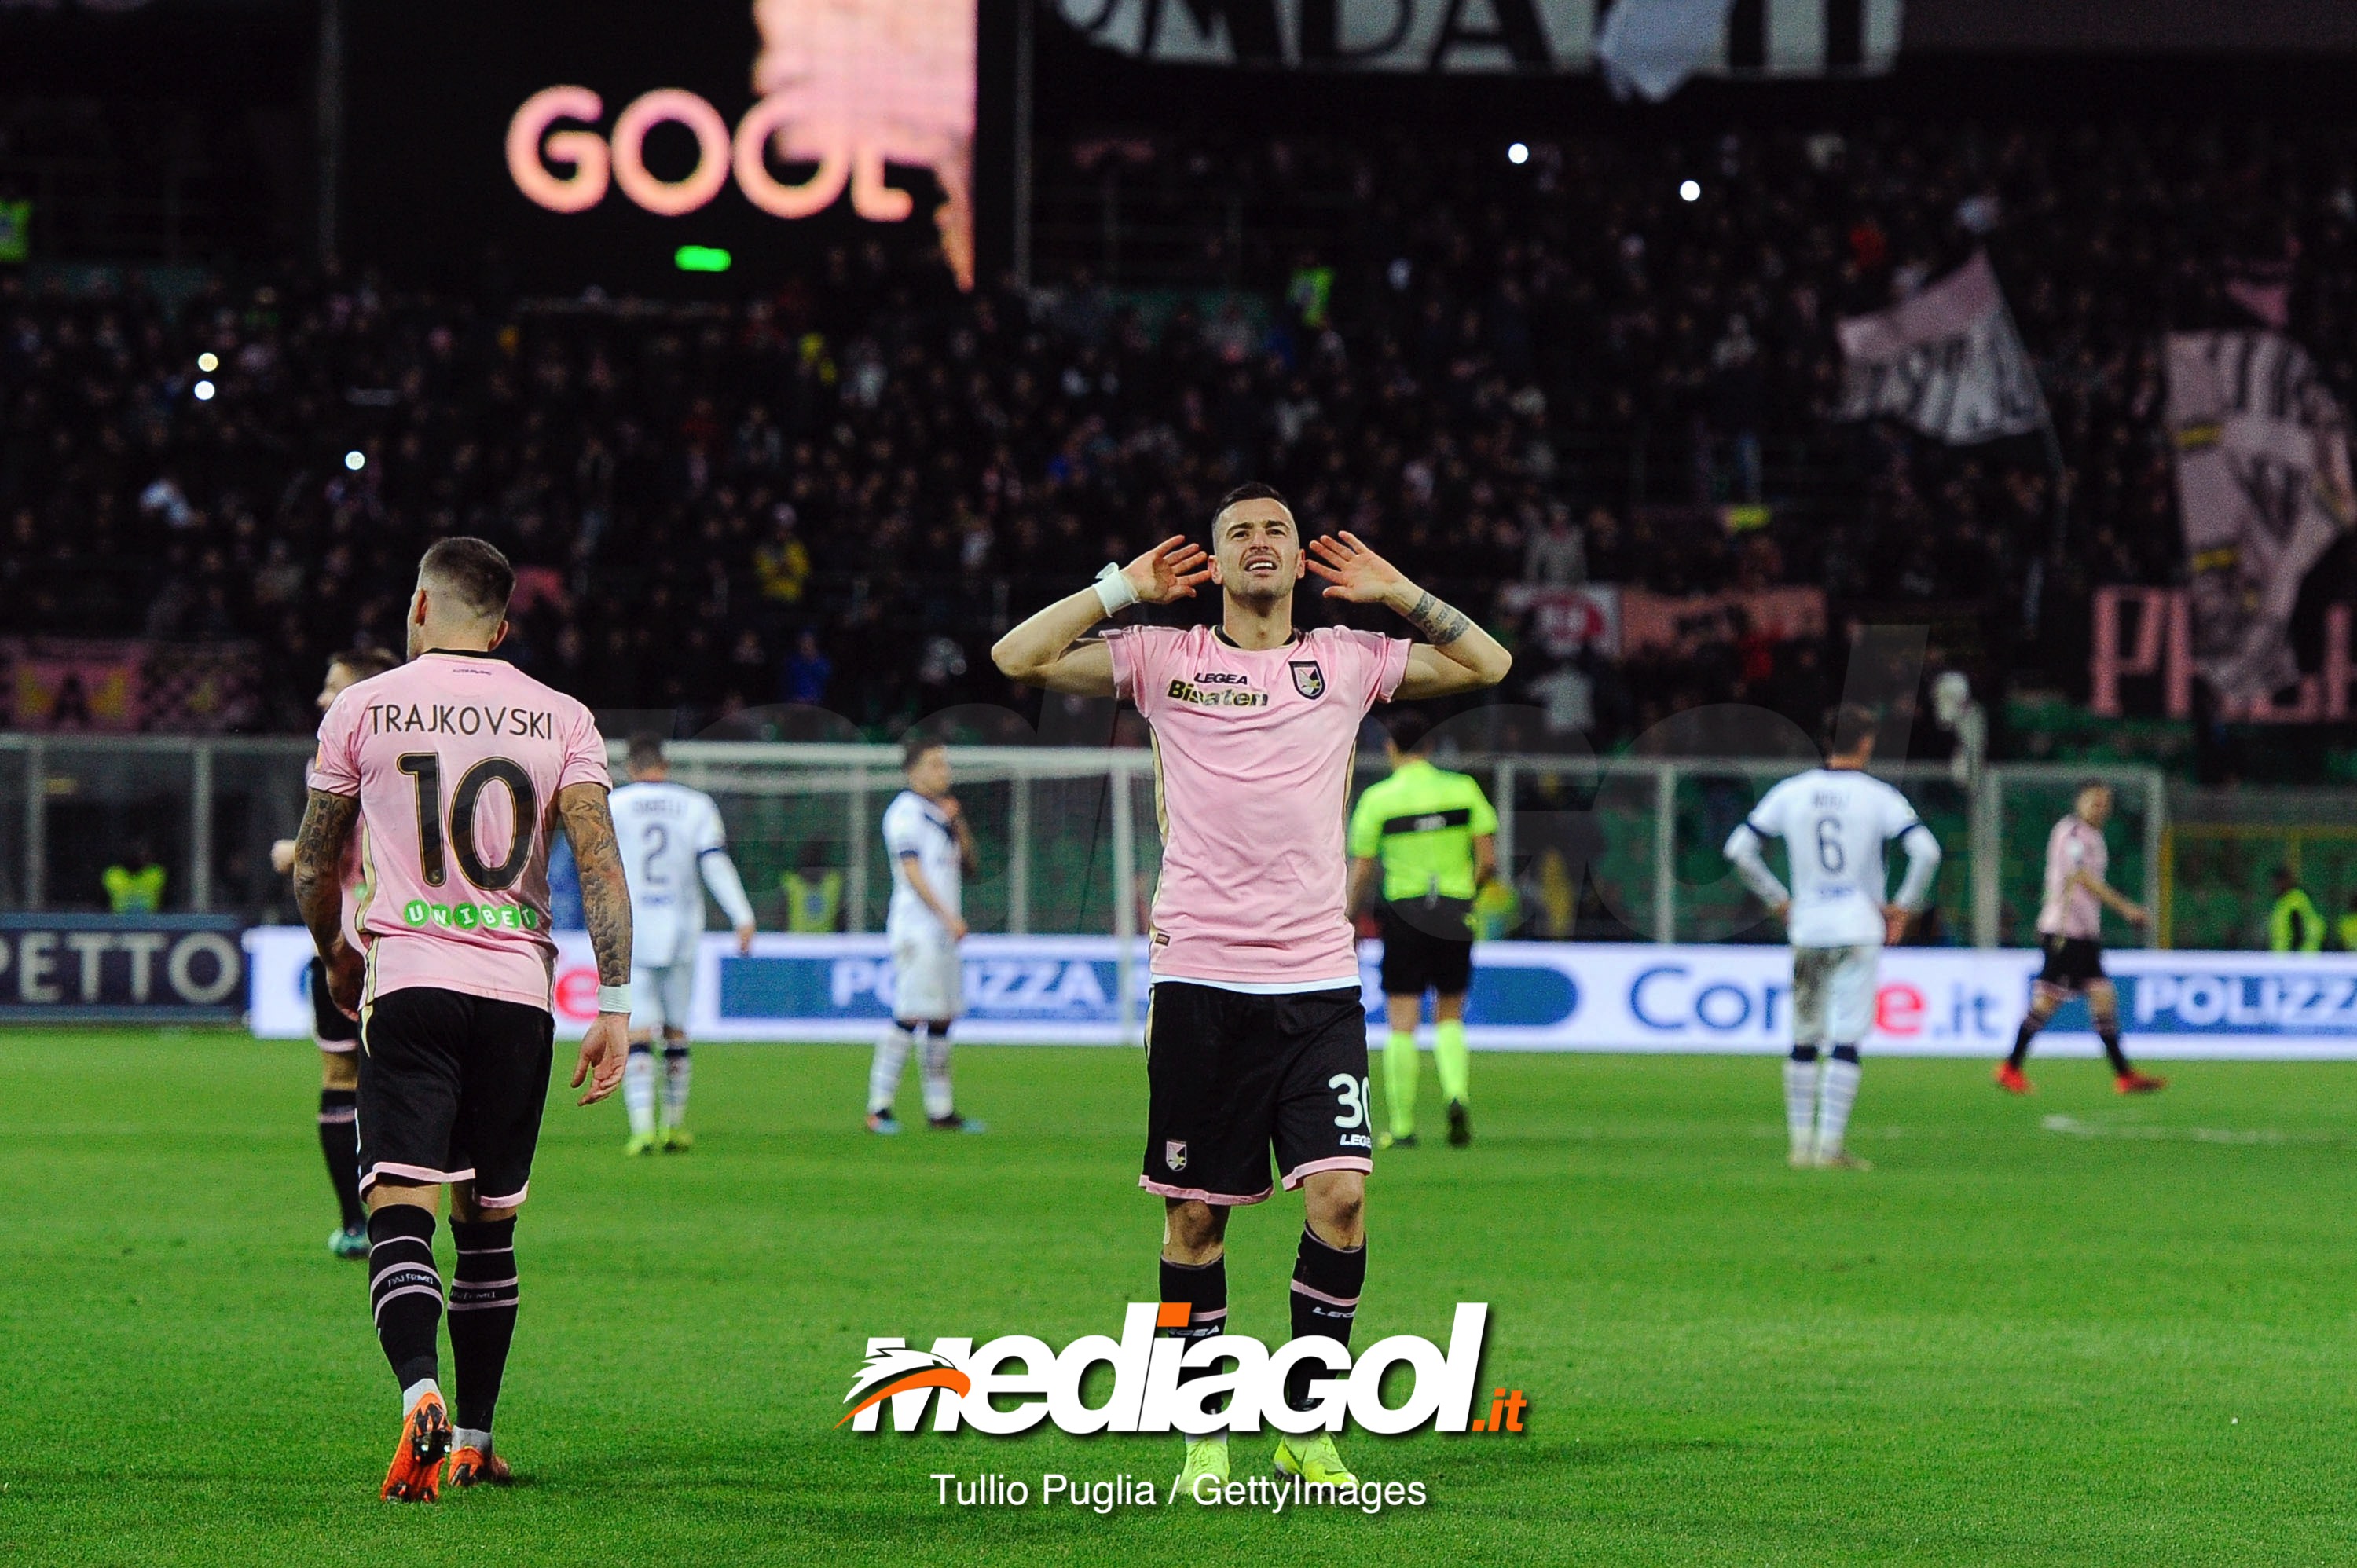 PALERMO, ITALY - FEBRUARY 15: Ilija Nestorovski of Palermo celebrates after scoring the opening goal during the Serie B match between US Citta di Palermo and Brescia at Stadio Renzo Barbera on February 15, 2019 in Palermo, Italy. (Photo by Getty Images/Getty Images)